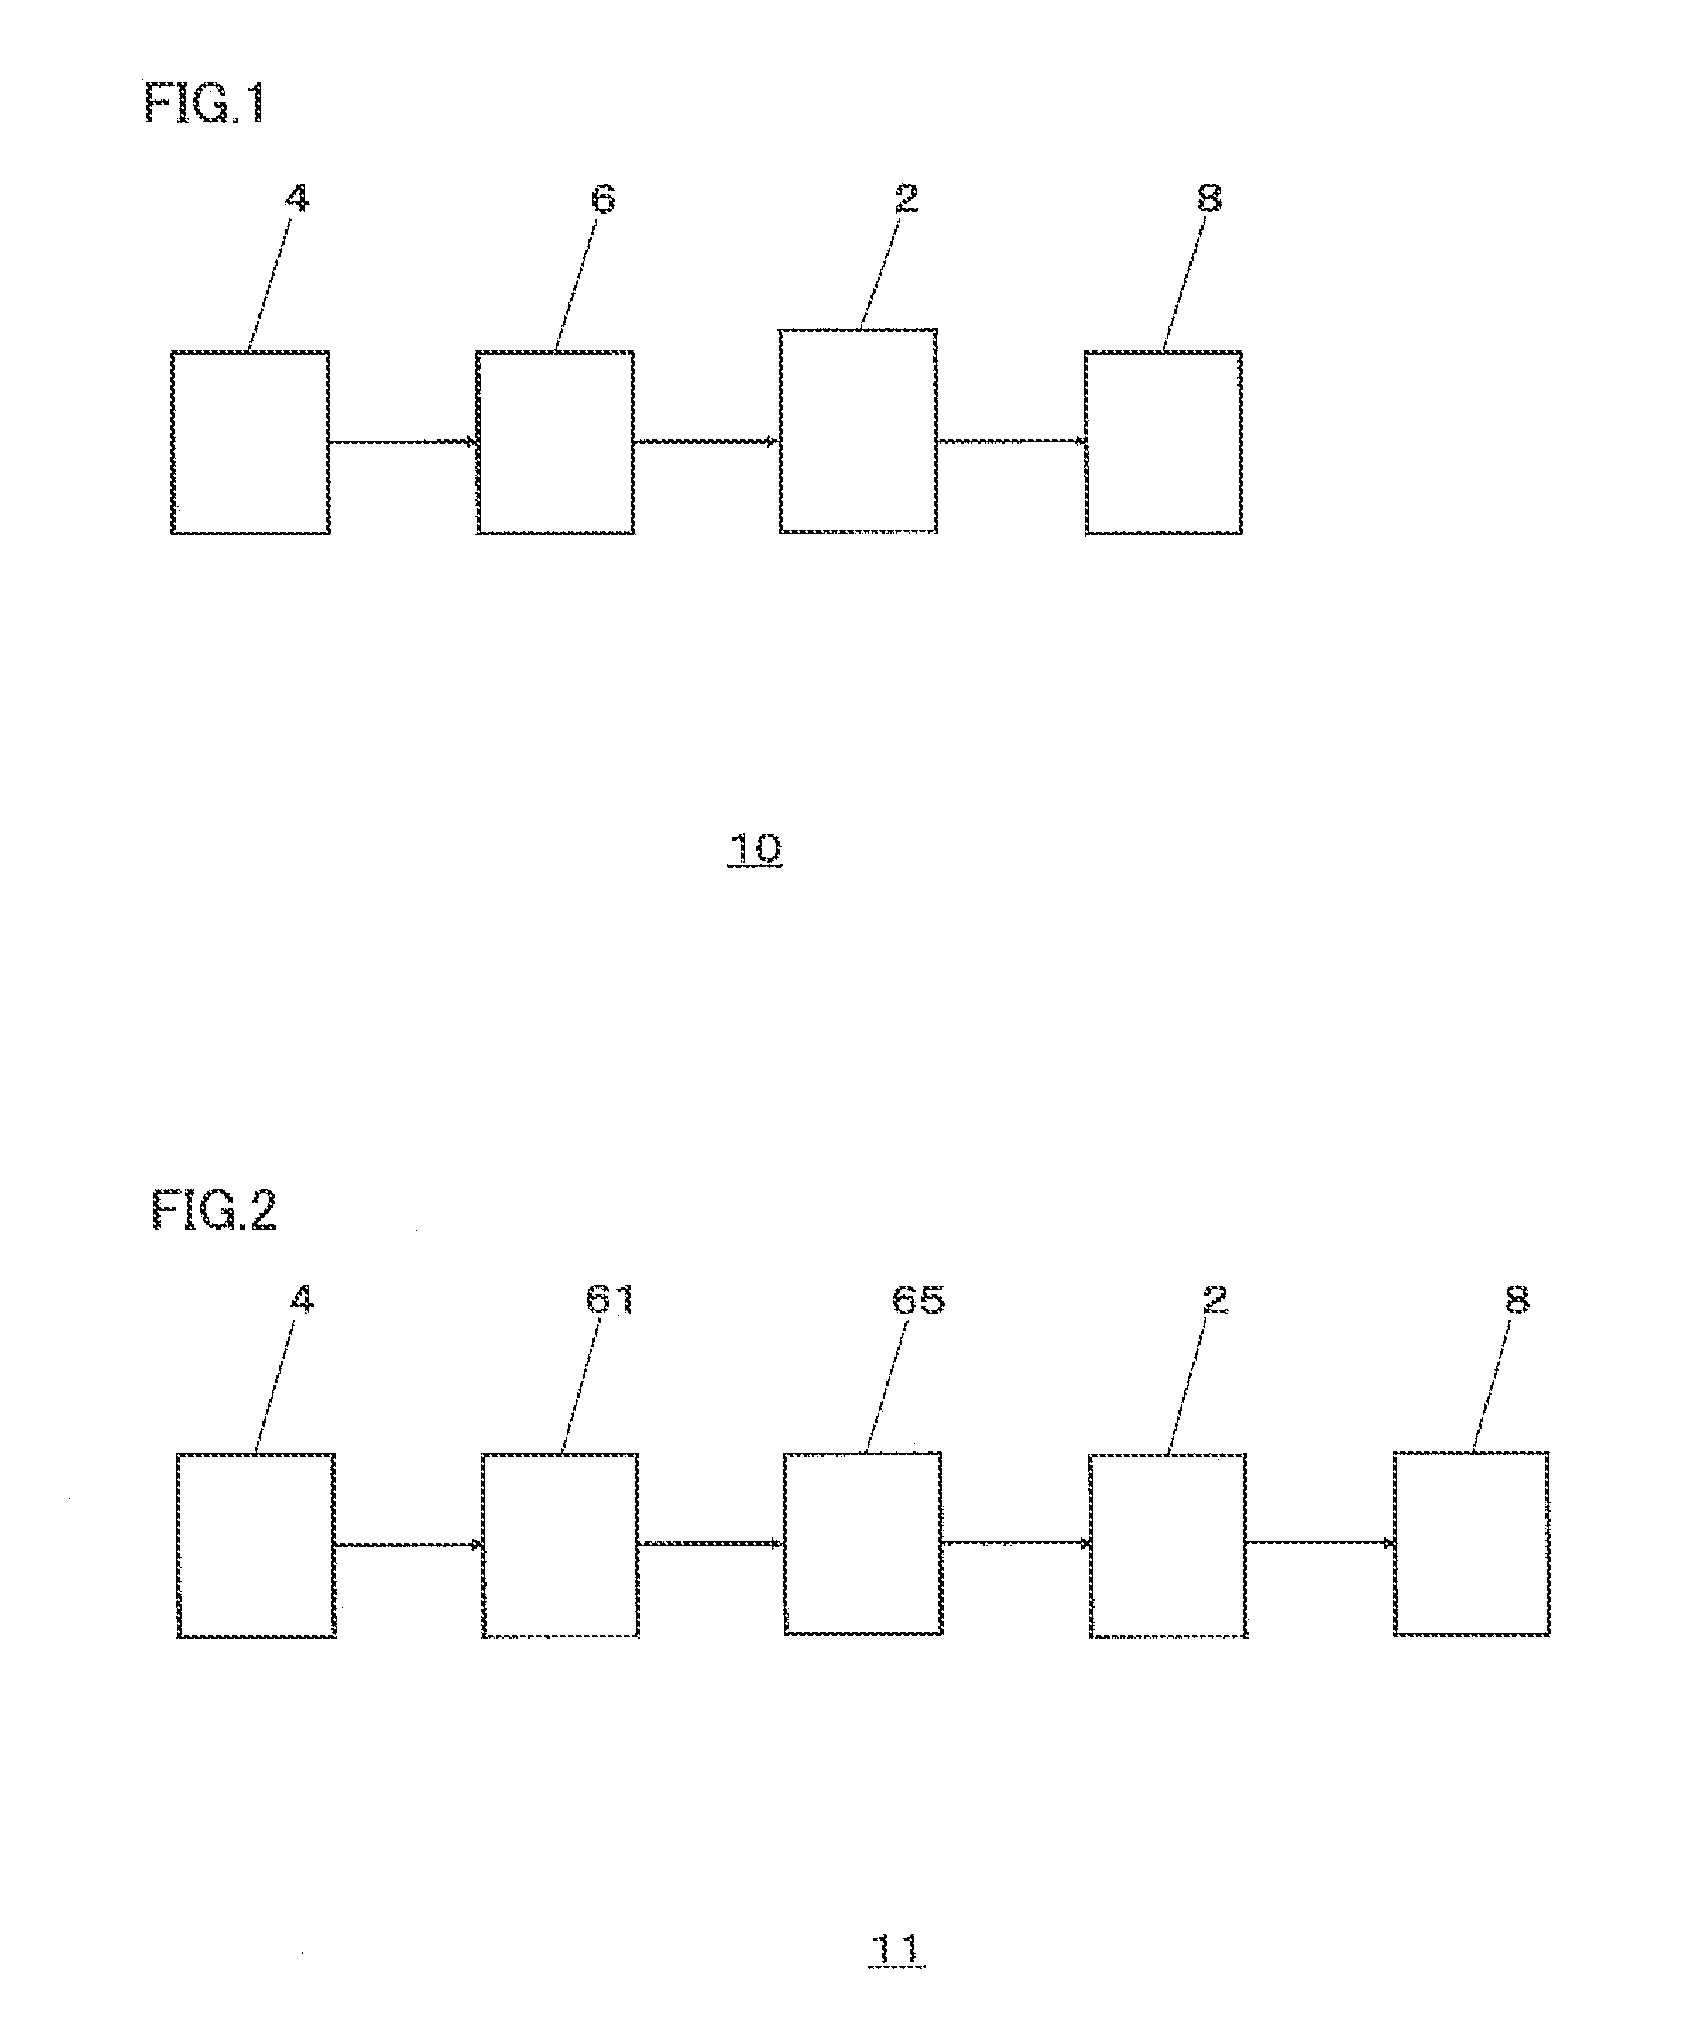 Sublimable aromatic compound removing unit for process gas analyzing device, and process gas analyzing device including the same